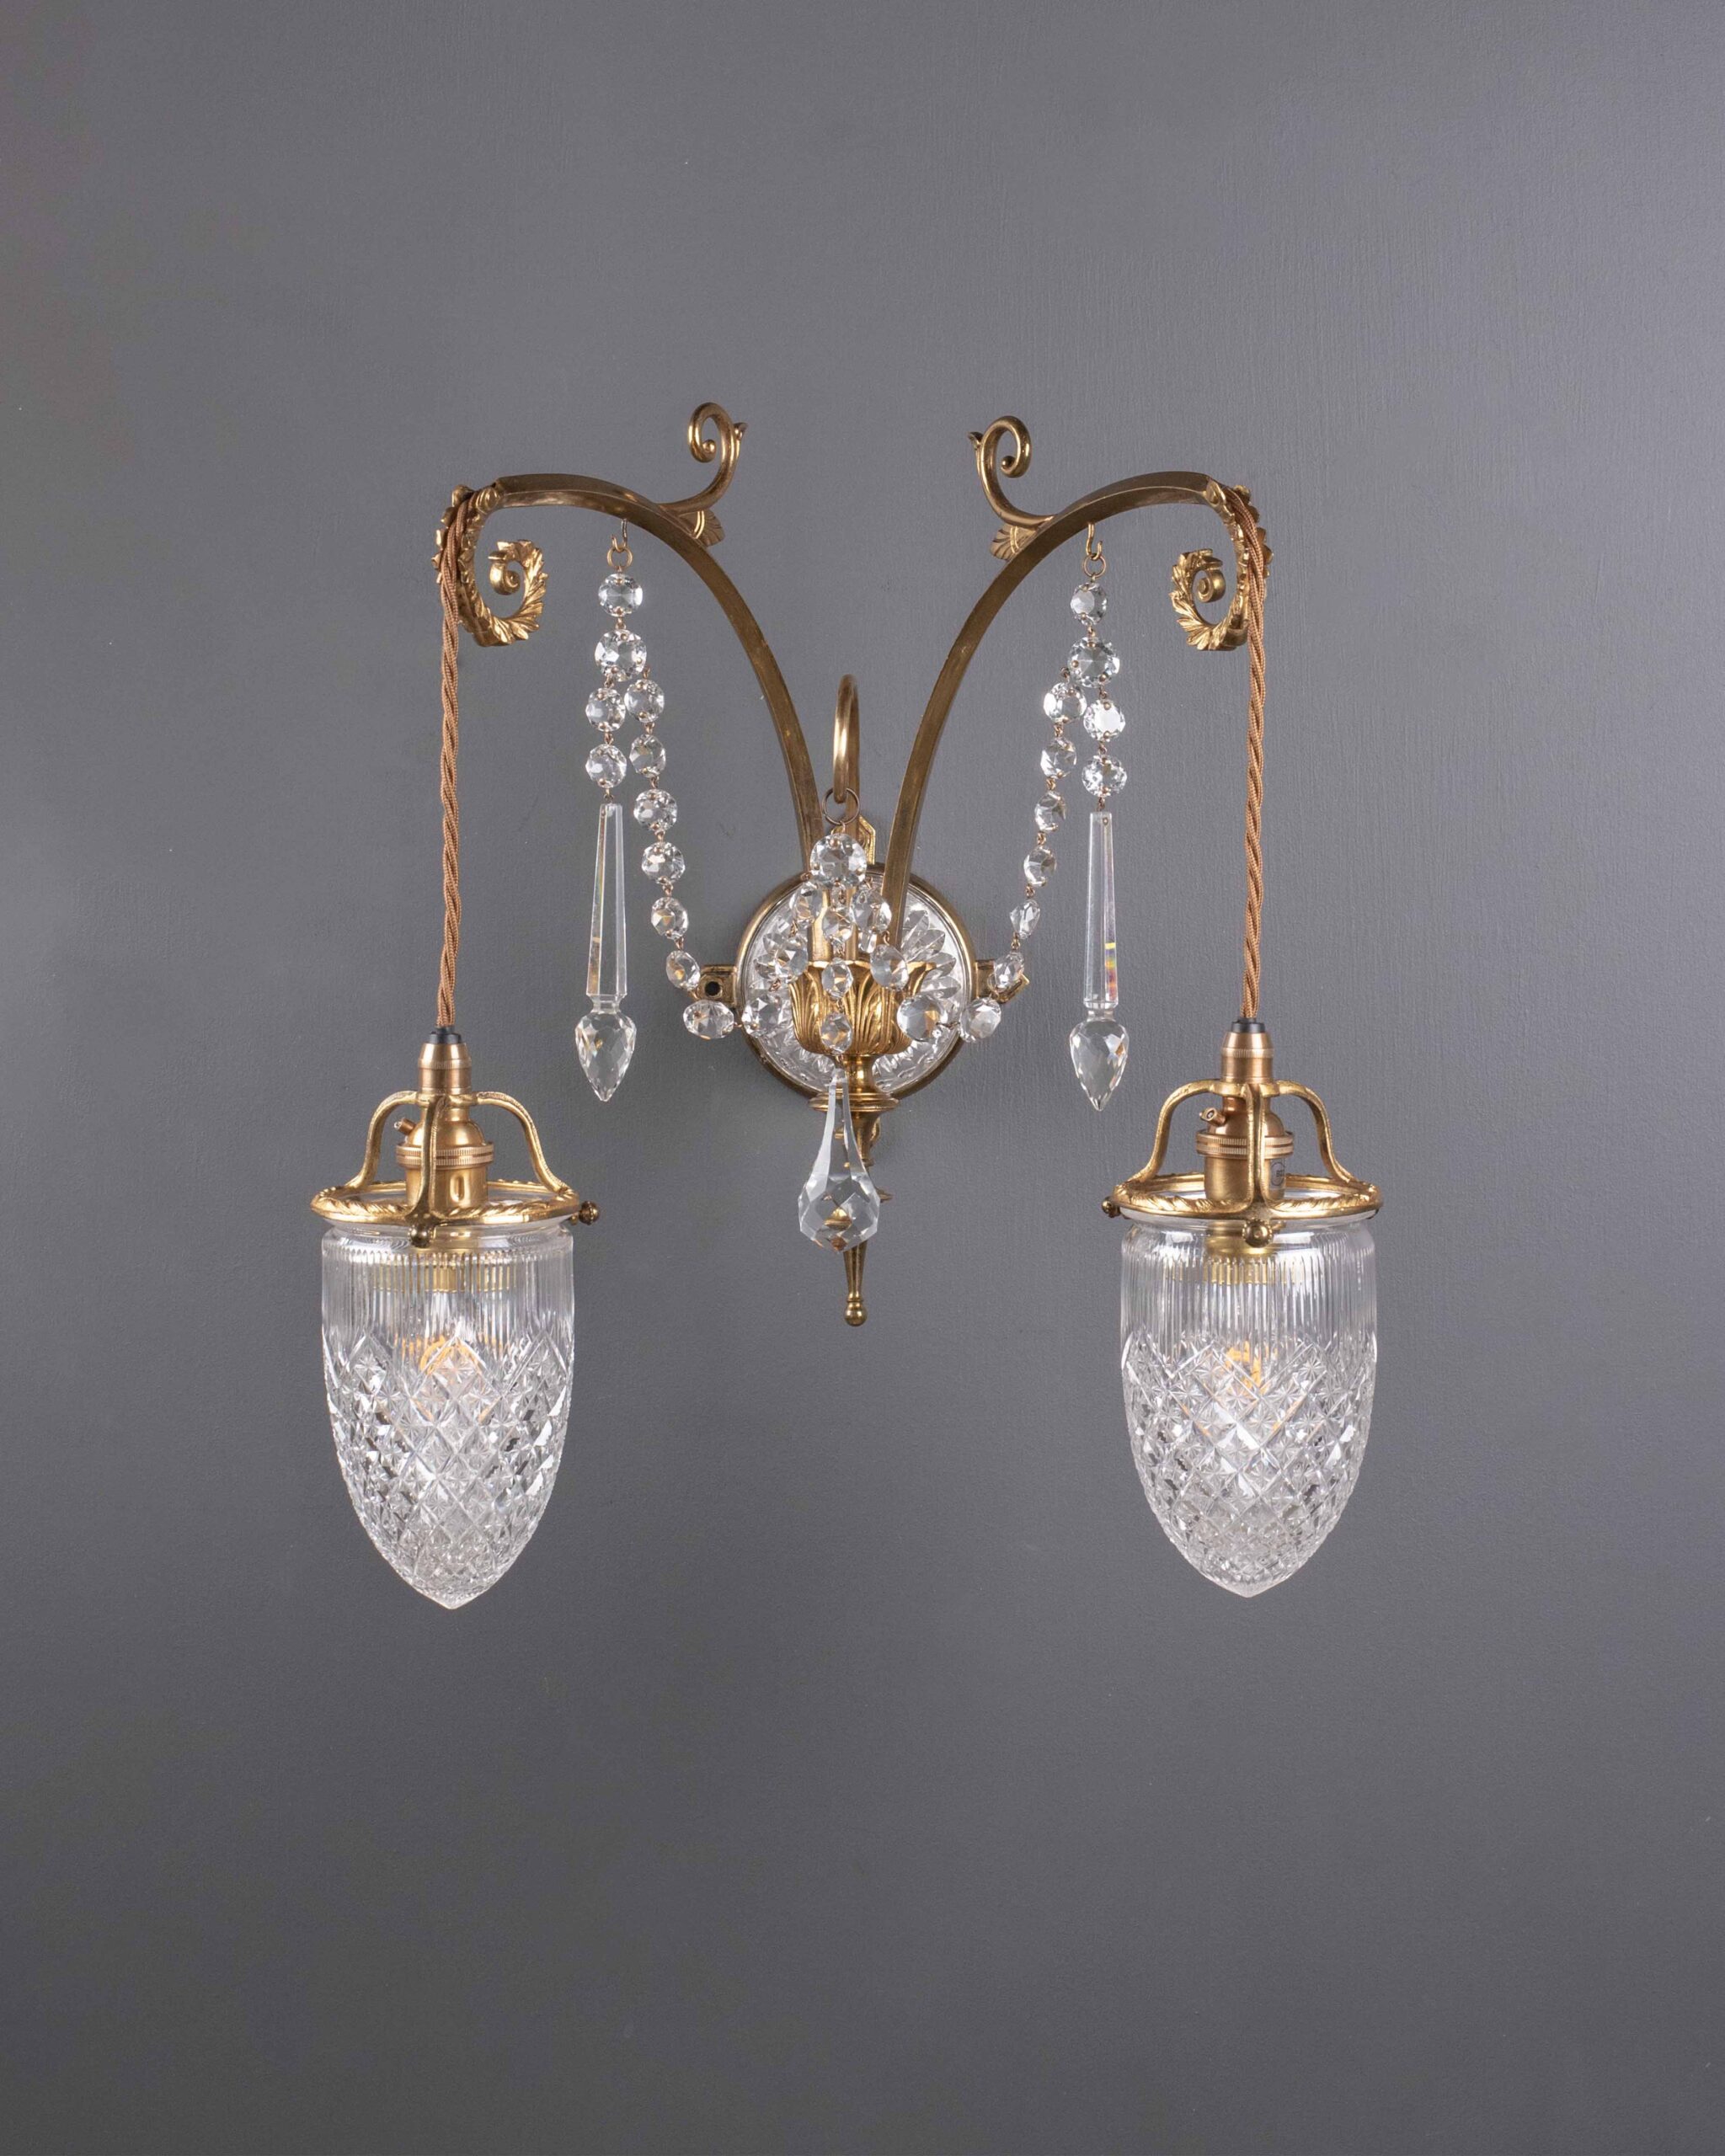 Set of 6 double arm antique wall brackets with cut crystal shades & drops by F & C Osler 2